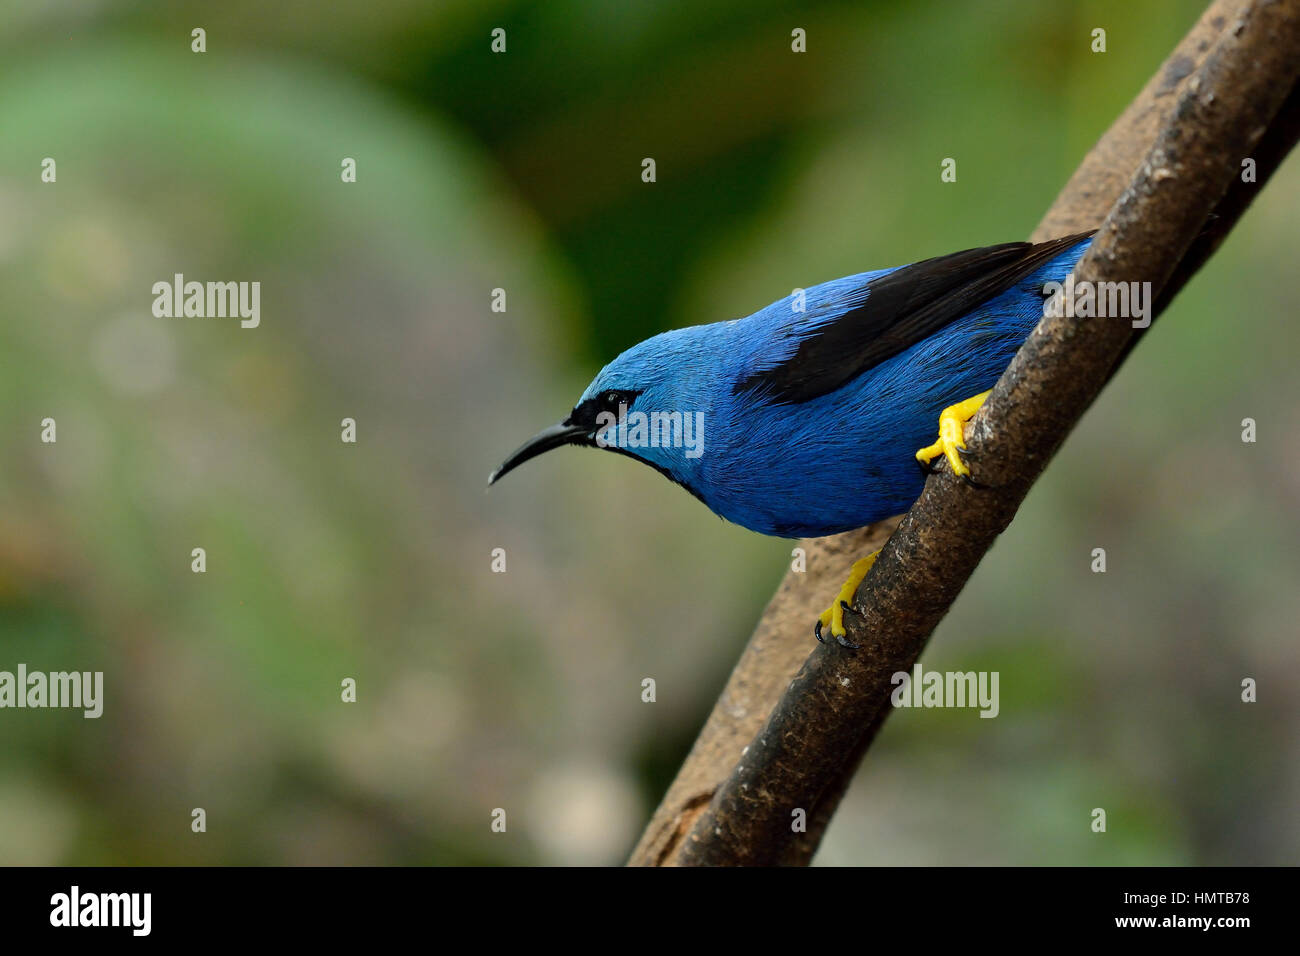 A Male Shining Honeycreeper in Costa Rica Tropical rain forest Stock Photo